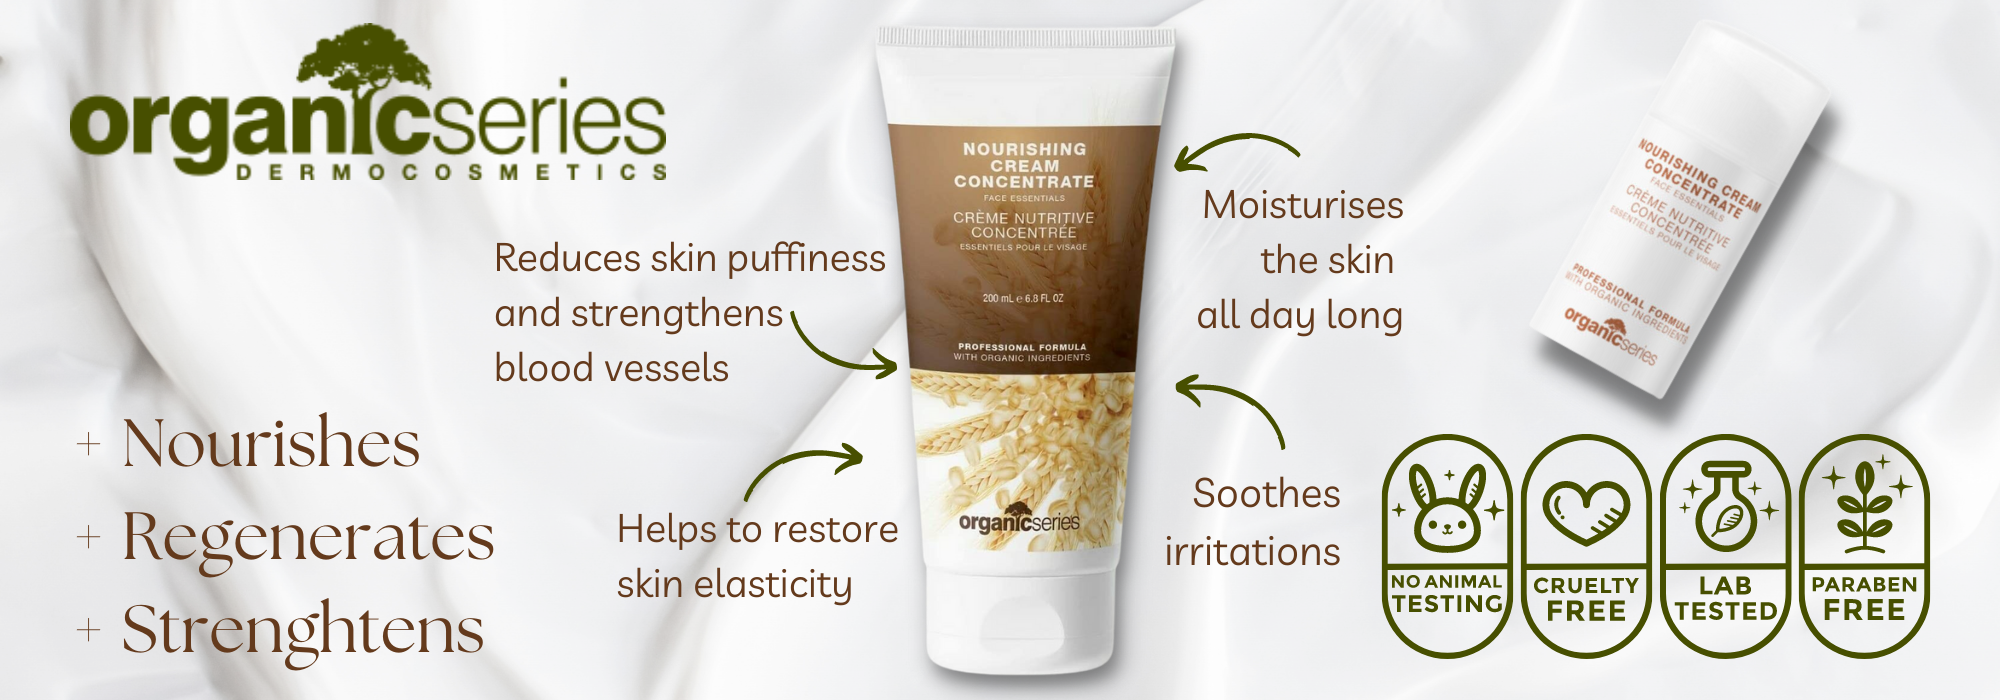 nourishing cream concentrate by organic series